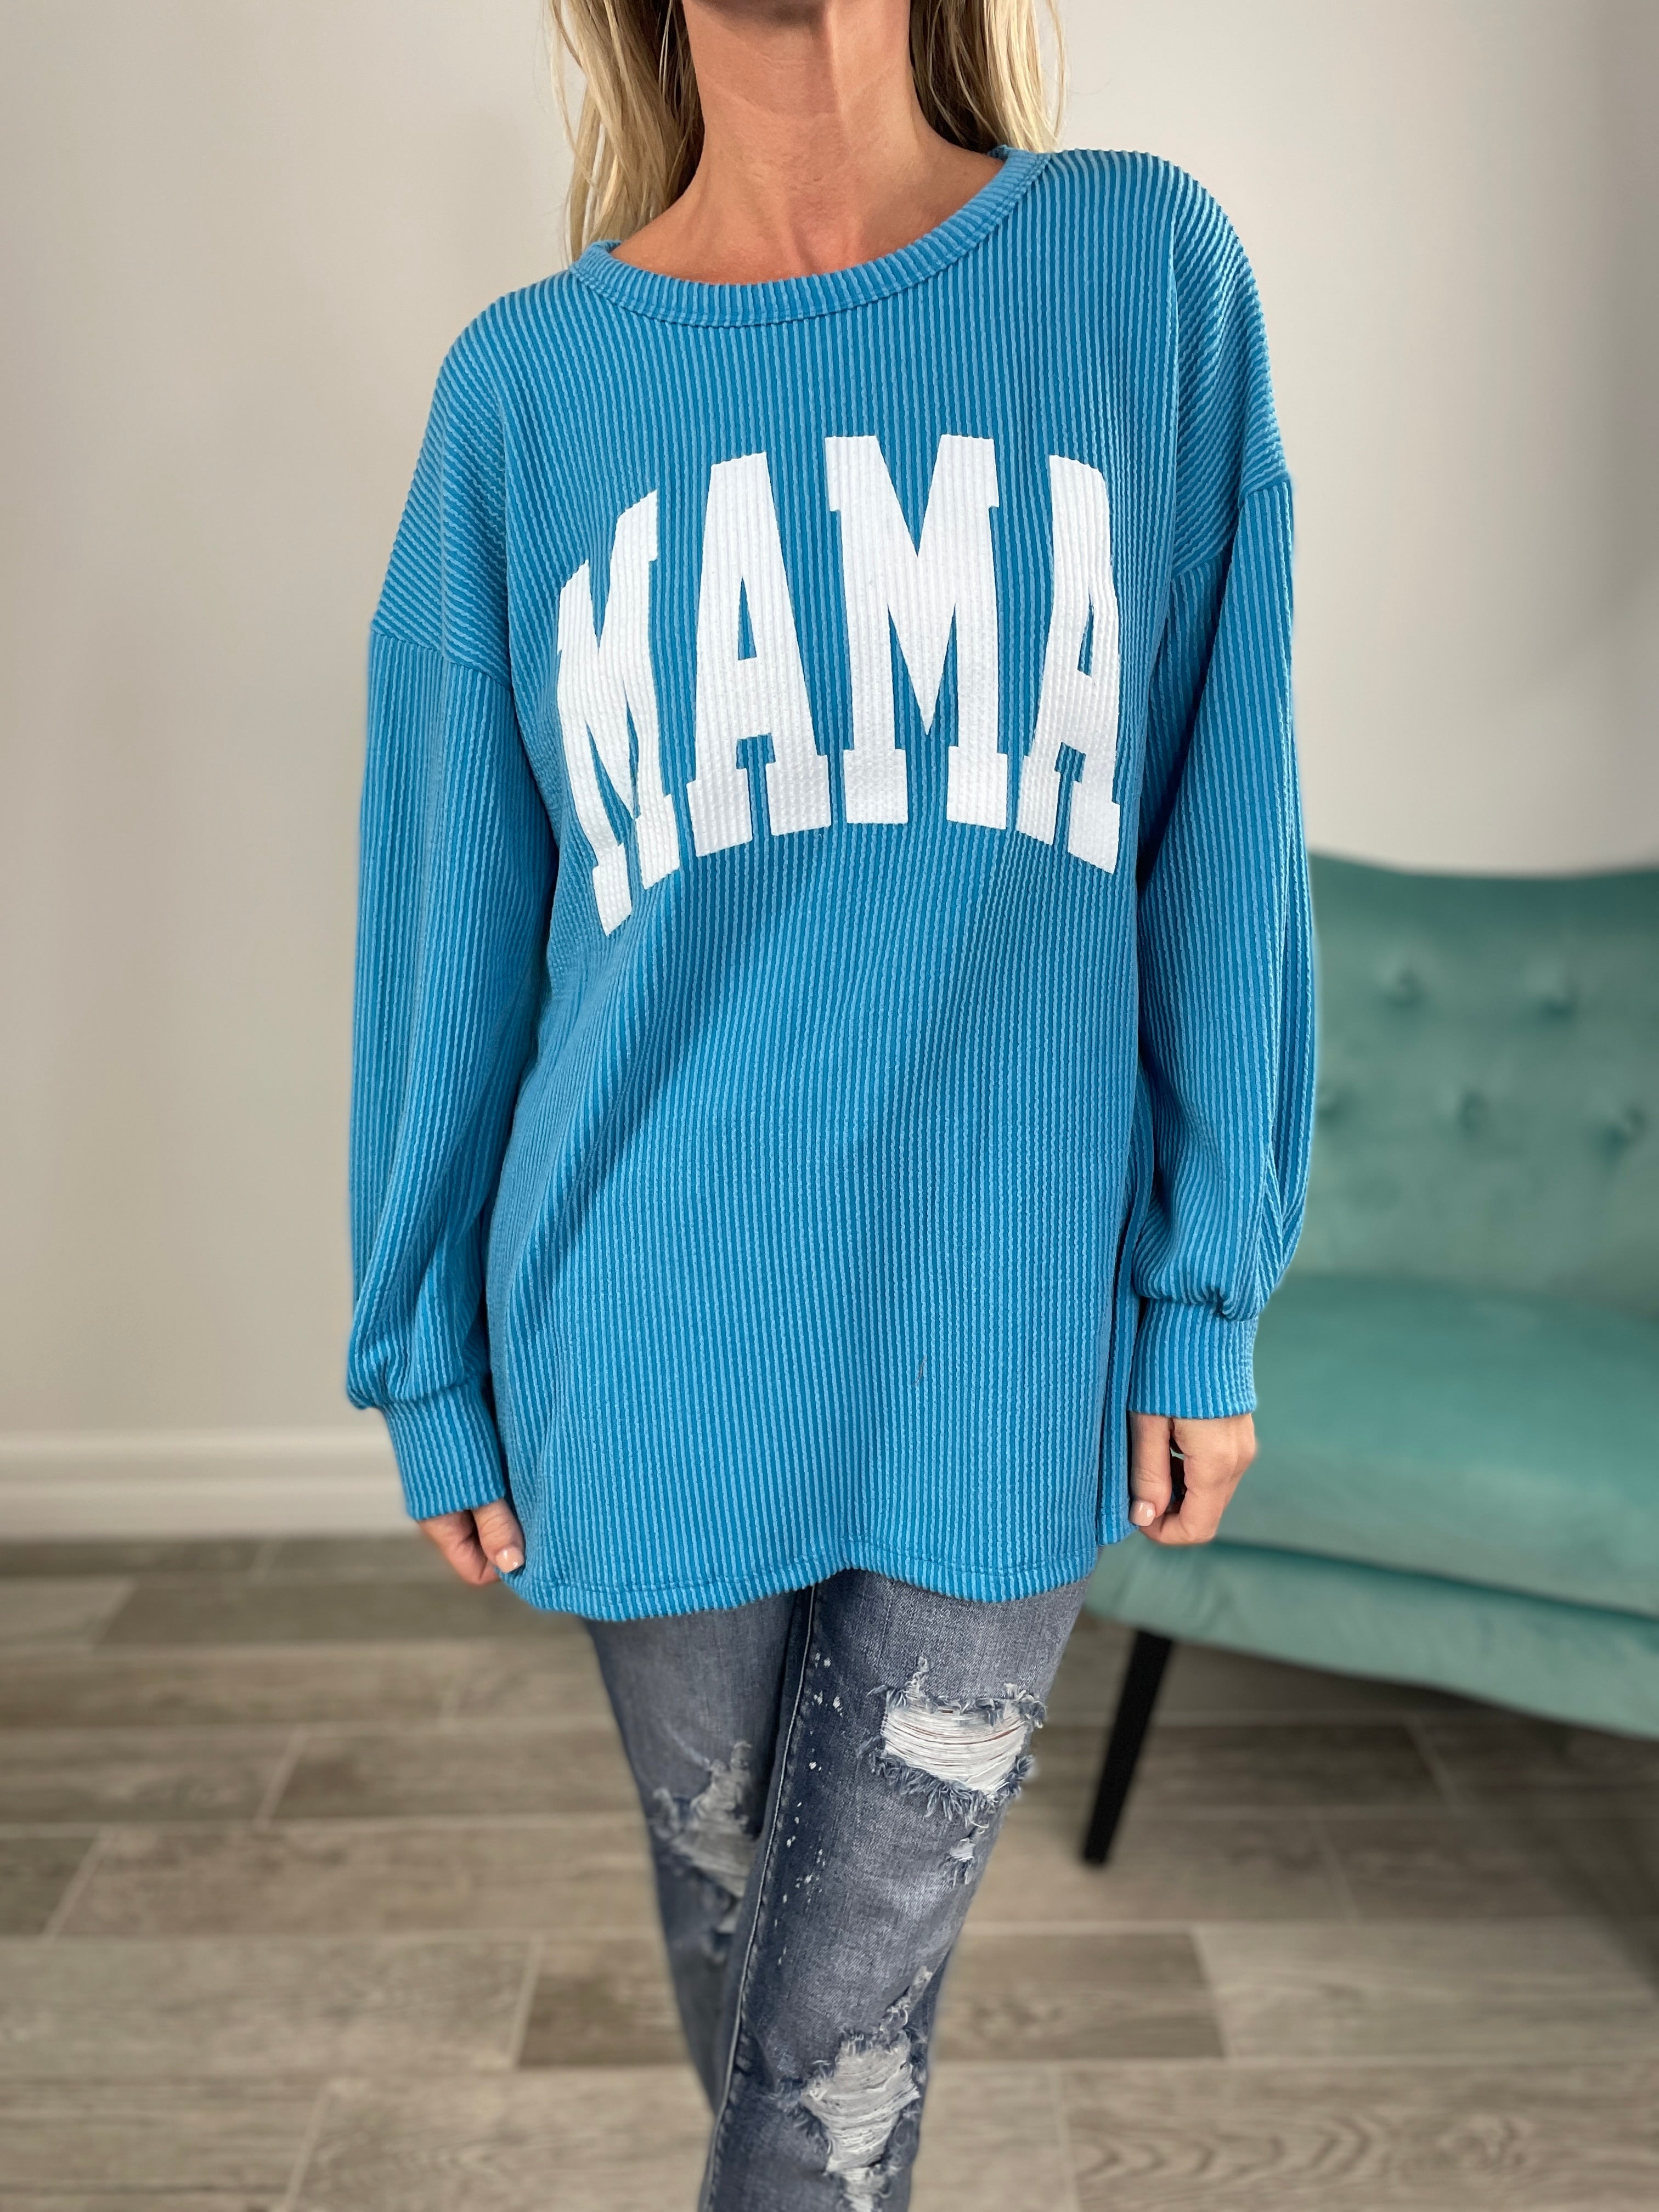 Mama Corded Sweatshirt-160 Sweatshirts- Simply Simpson's Boutique is a Women's Online Fashion Boutique Located in Jupiter, Florida